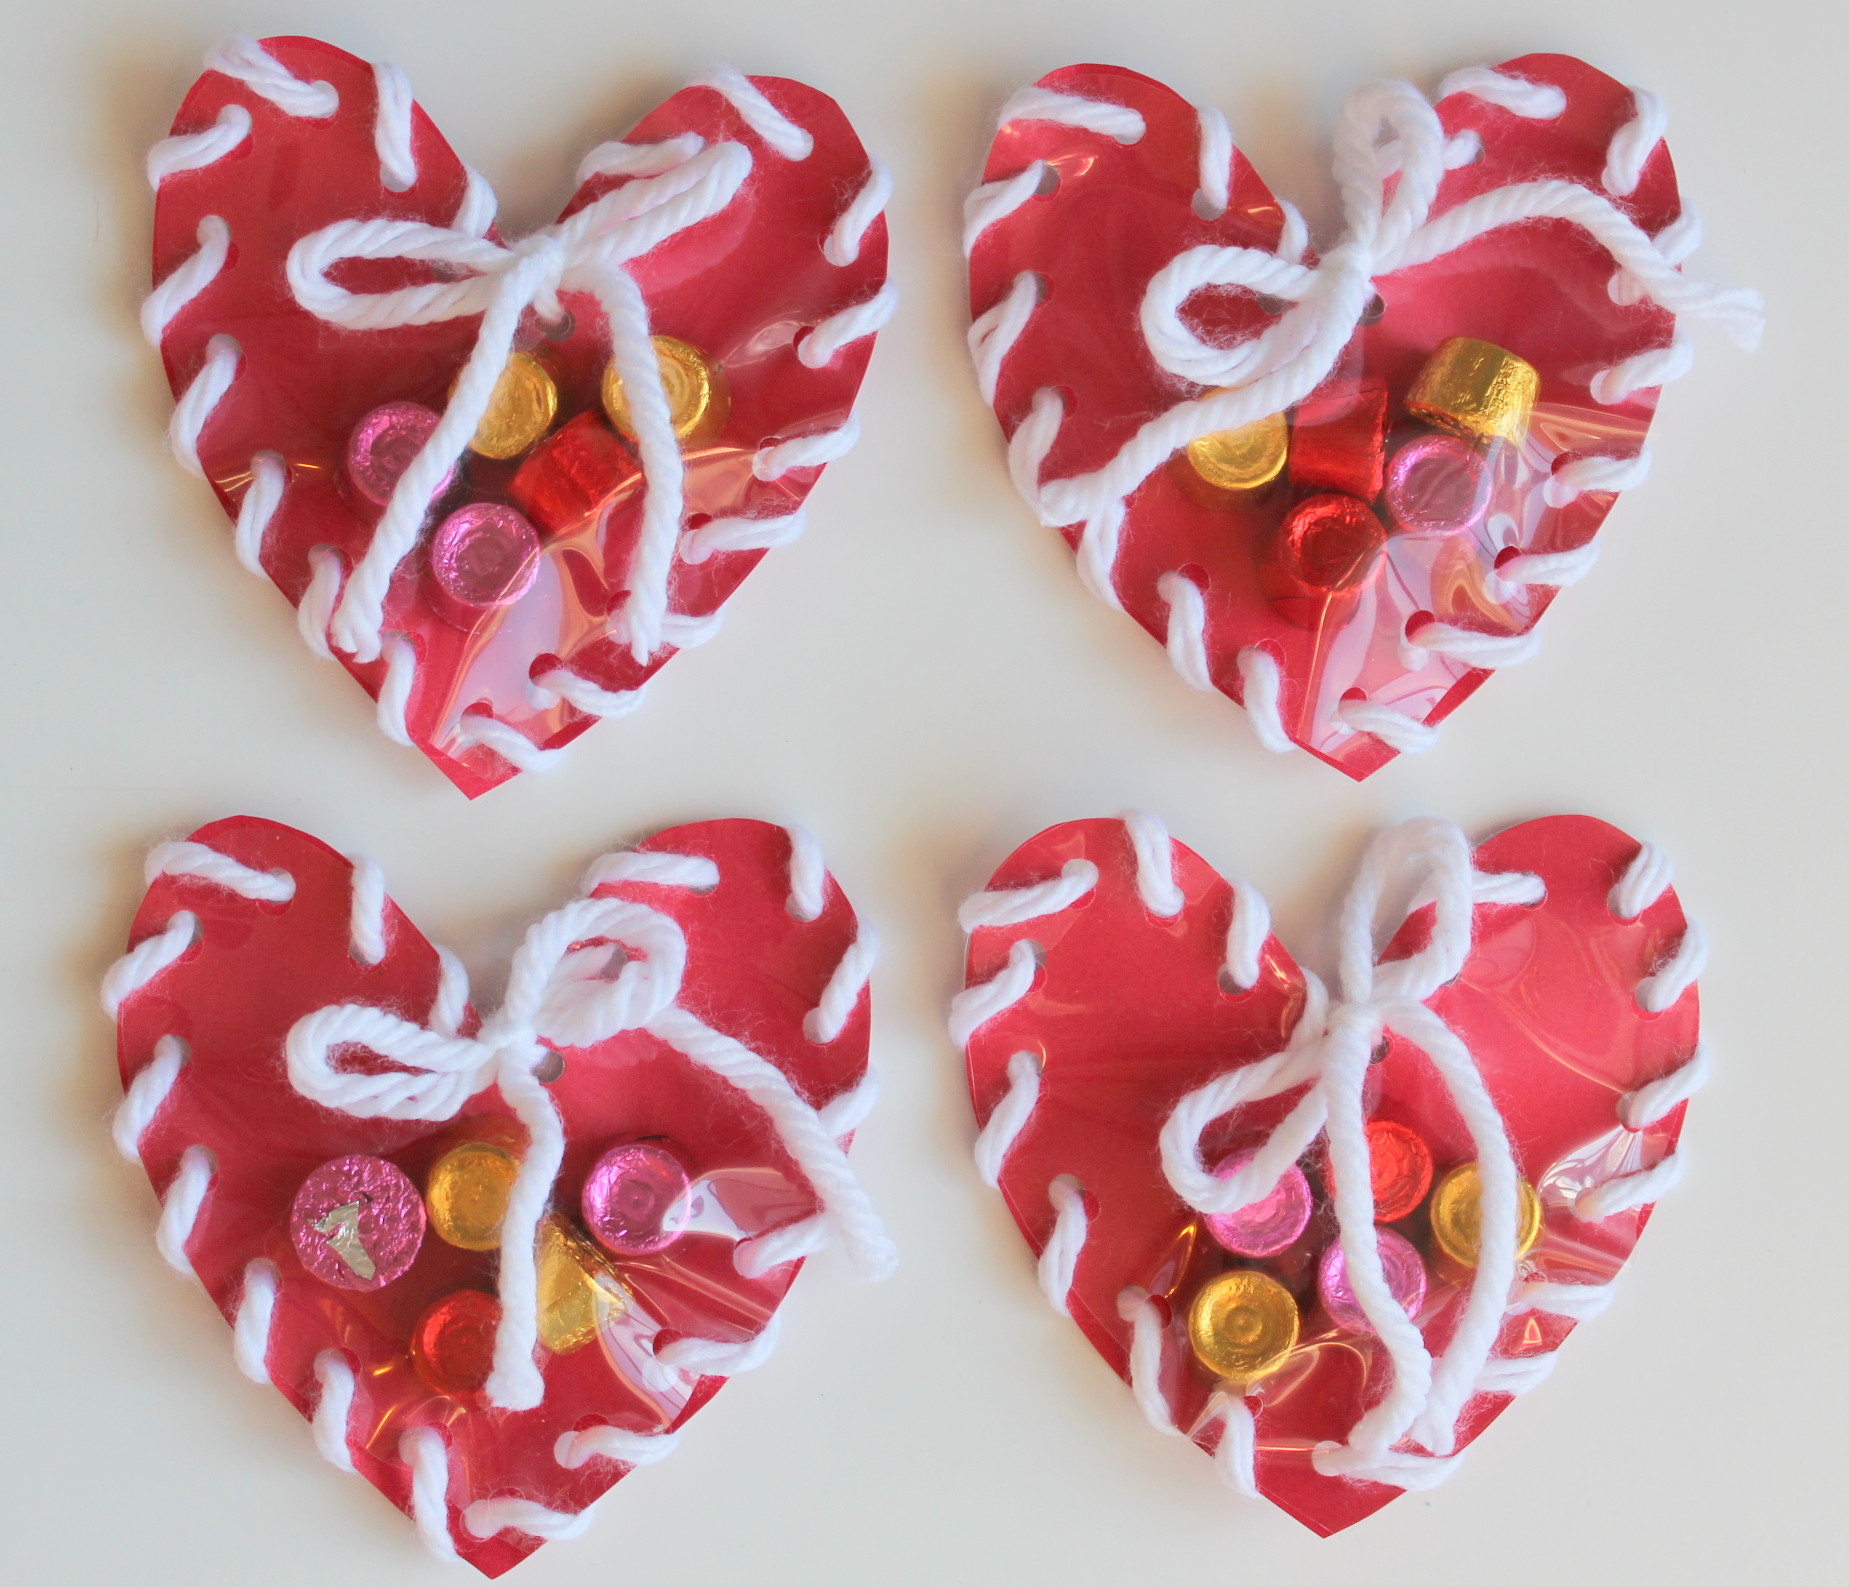 Crafts For Valentines Day
 Lollydot Hand Sewn Paper Heart Valentine Craft for Kids